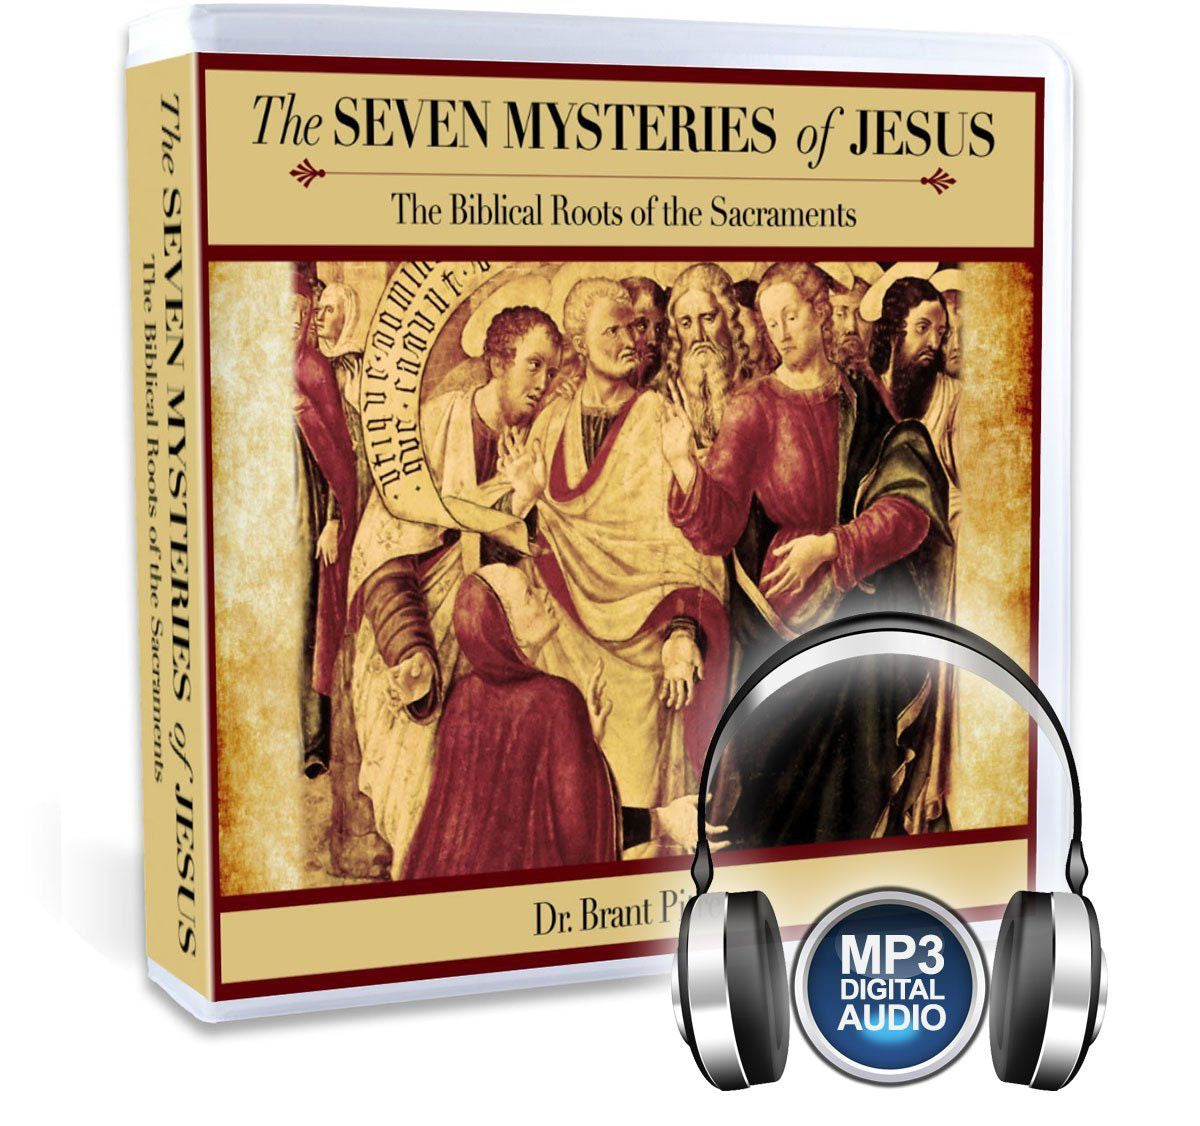 Dr. Brant Pitre gives you an invigorating and complete Bible study on the seven sacraments in the Bible: Baptism, Eucharist, Confession, Confirmation, Anointing of the Sick, Holy Matrimony, Holy Orders [Priesthood] (CD).